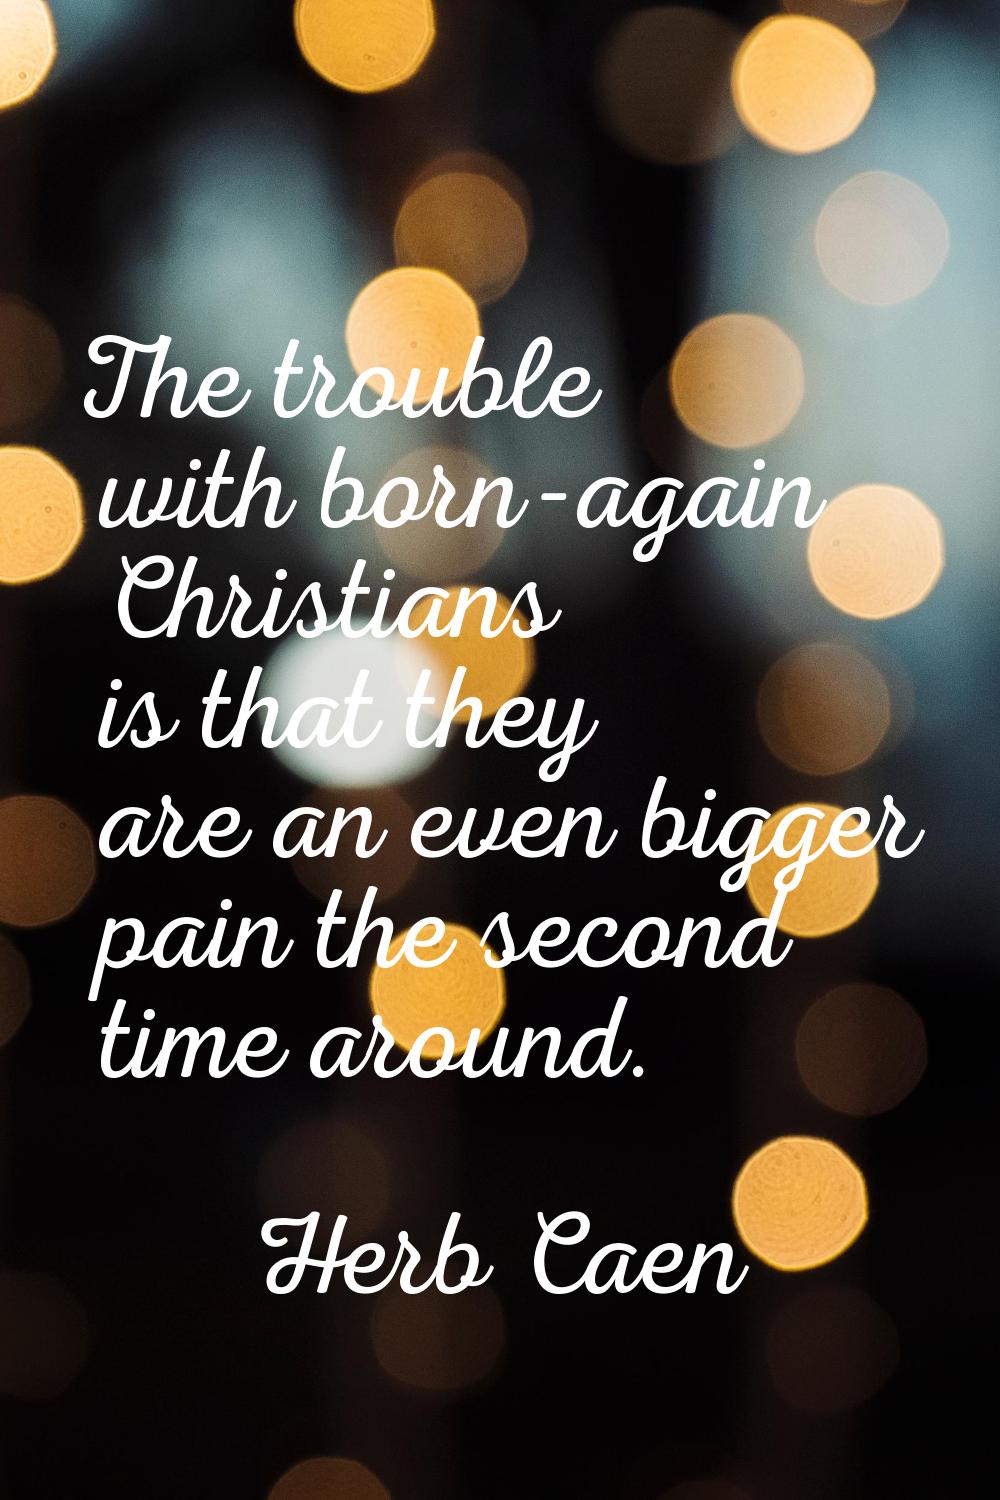 The trouble with born-again Christians is that they are an even bigger pain the second time around.